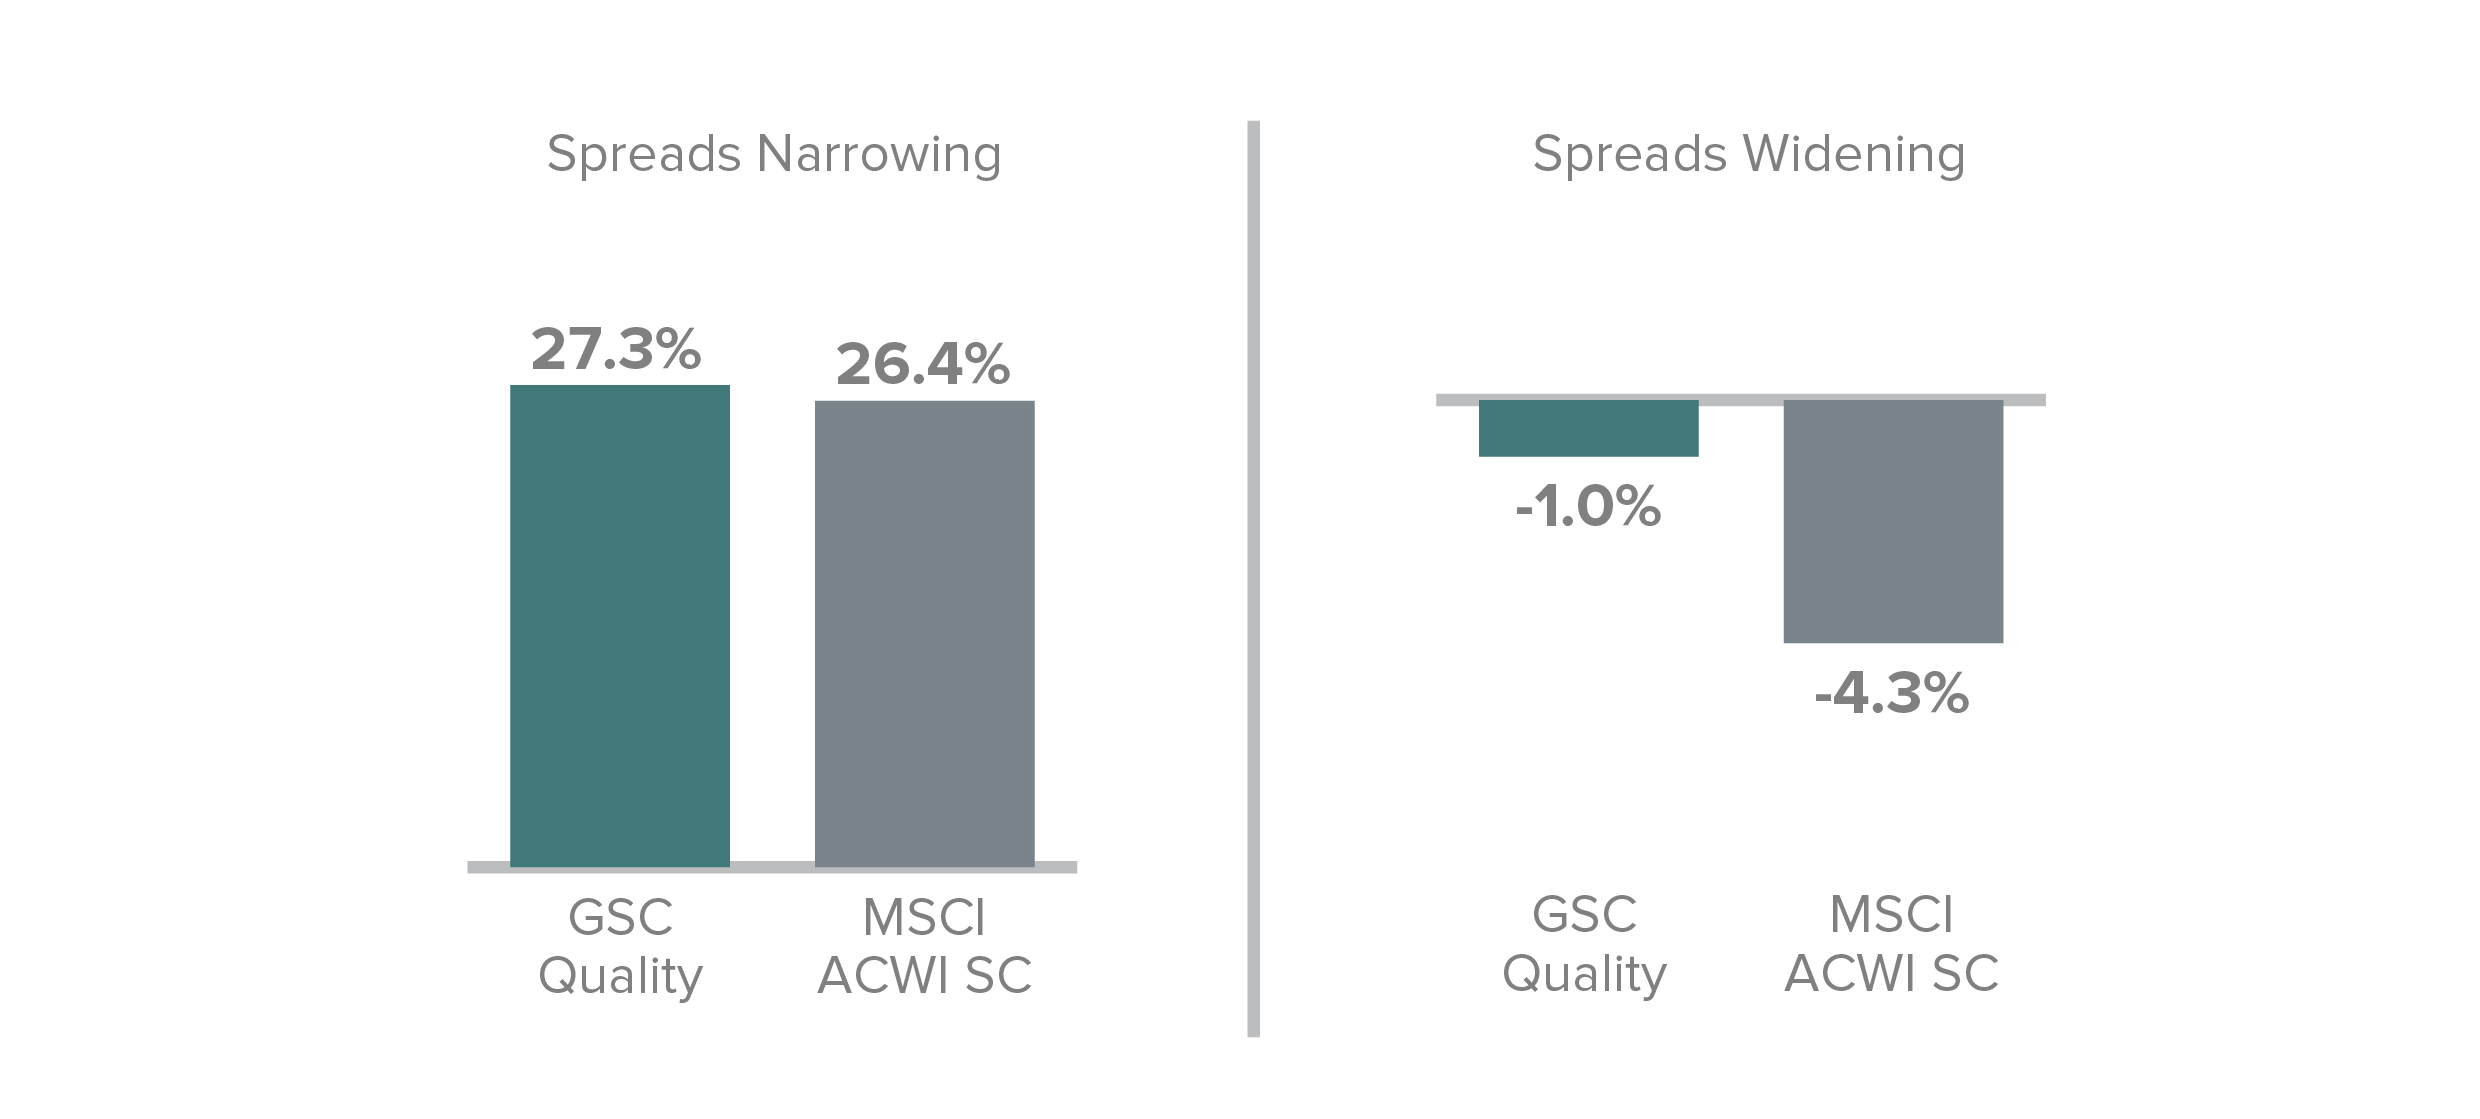 Spreads narrowing is 27.3% for GSC Quality and 26.4% for MSCI ACWI SC. Spreads Widening is -1.0% for GSC Quality and -4.3% for MSCI ACWI SC